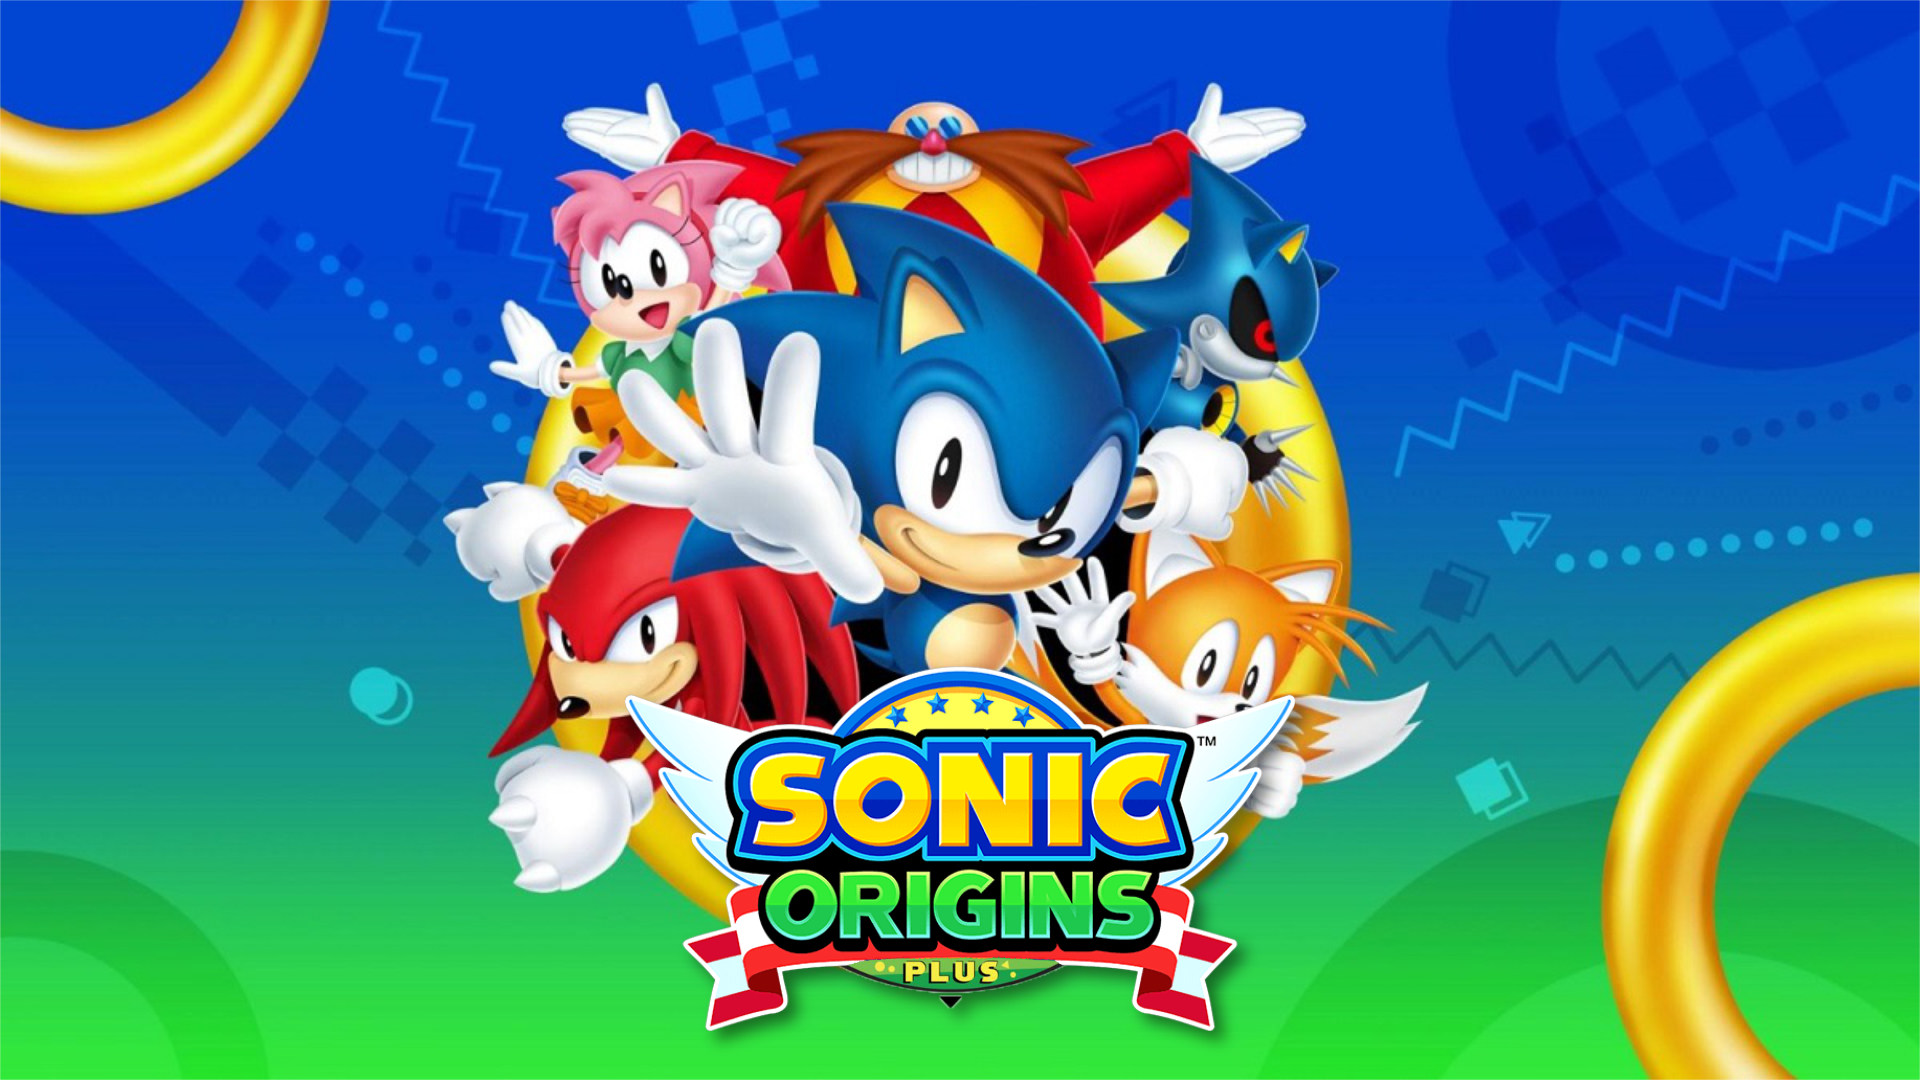 Sonic Origins - Game Overview